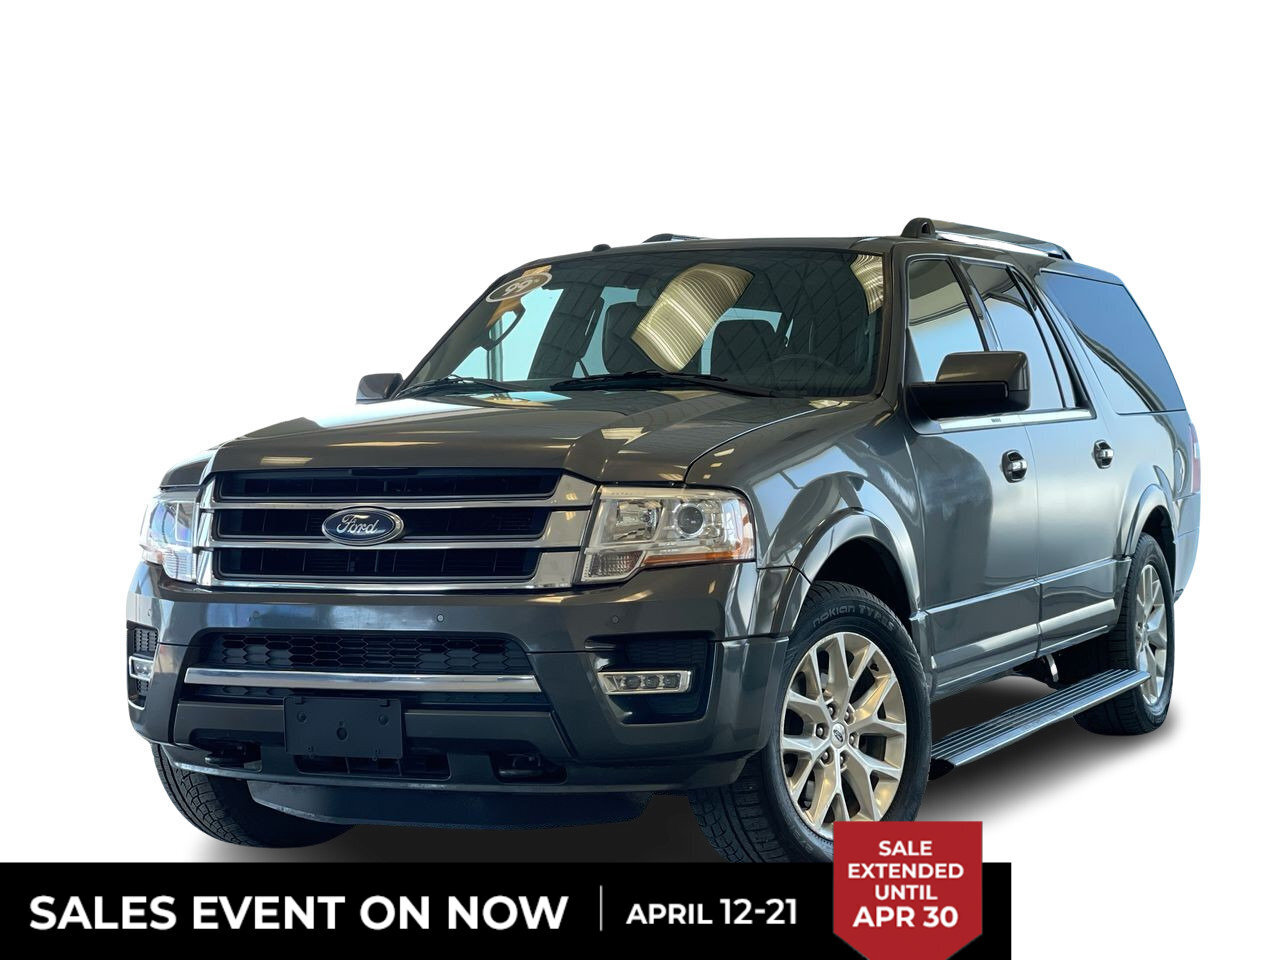 2017 Ford Expedition 